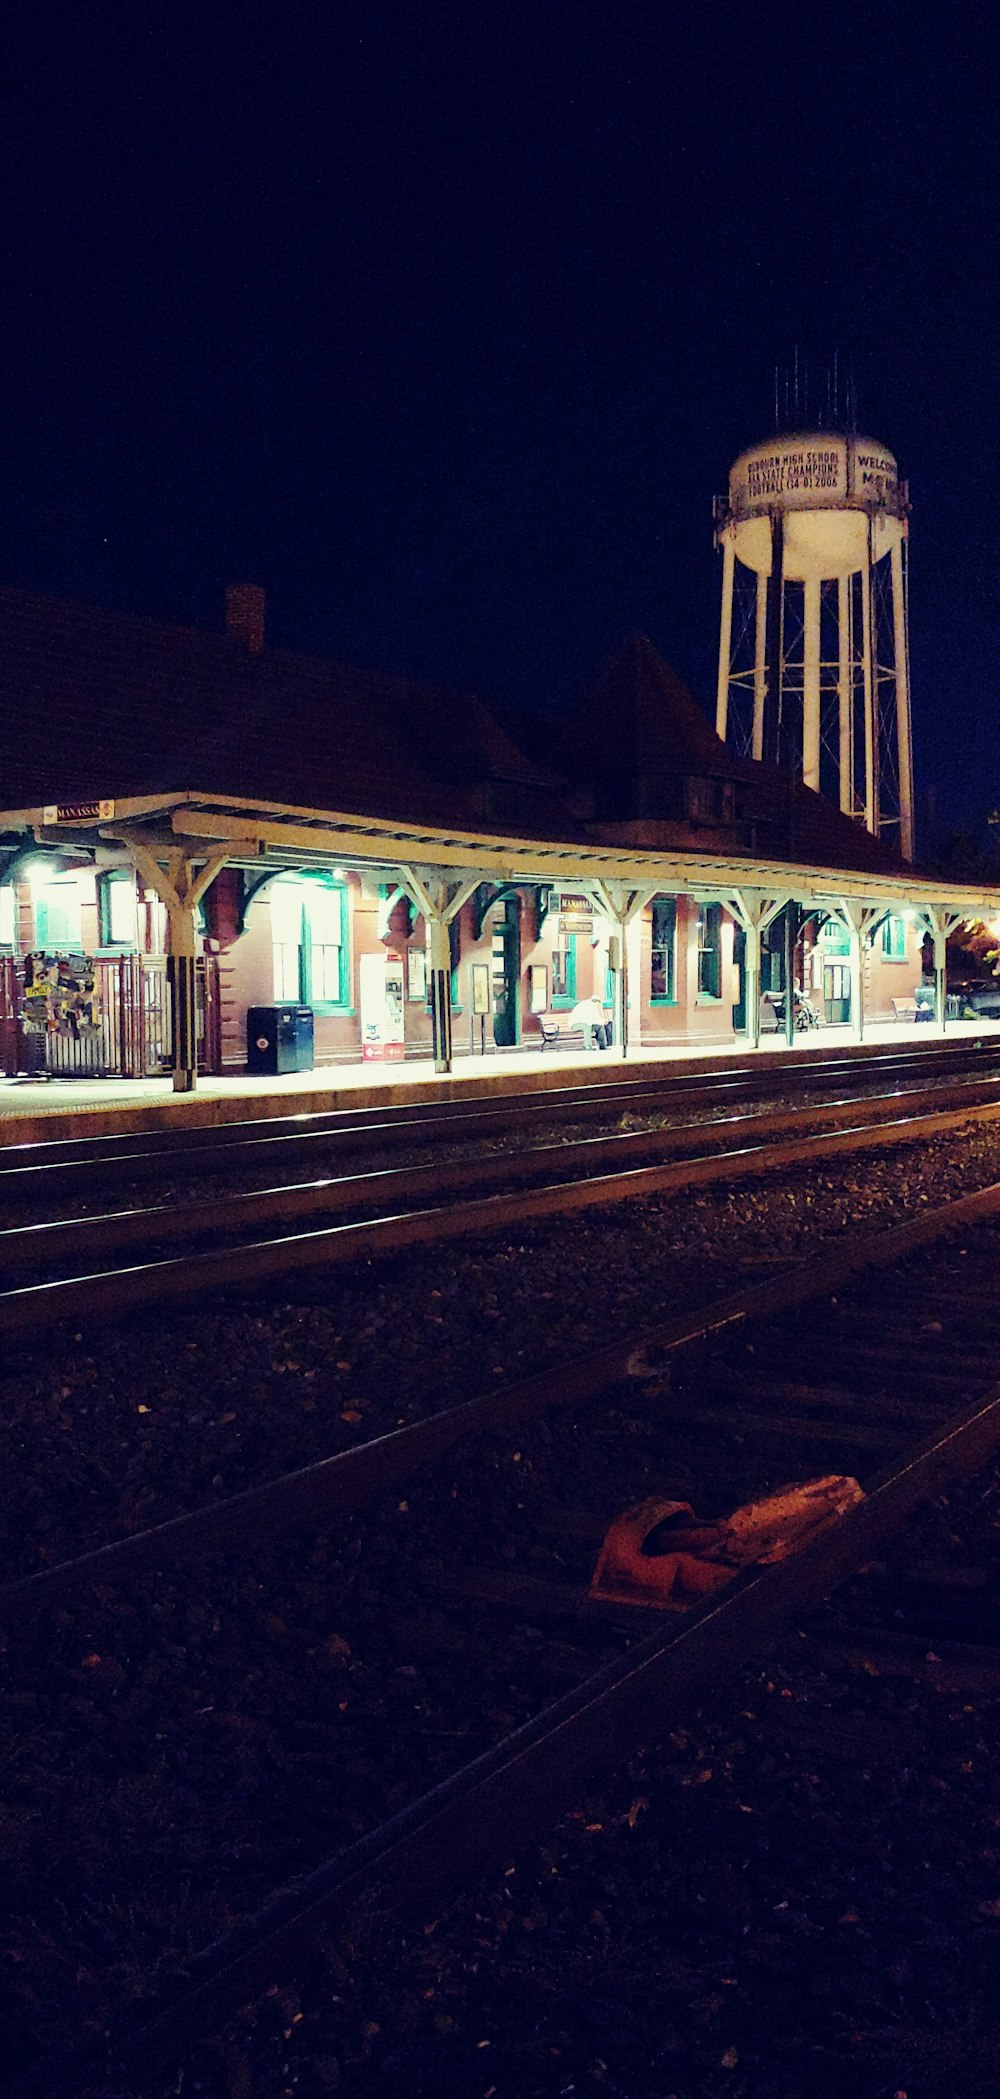 a train station at night with a water tower in the background